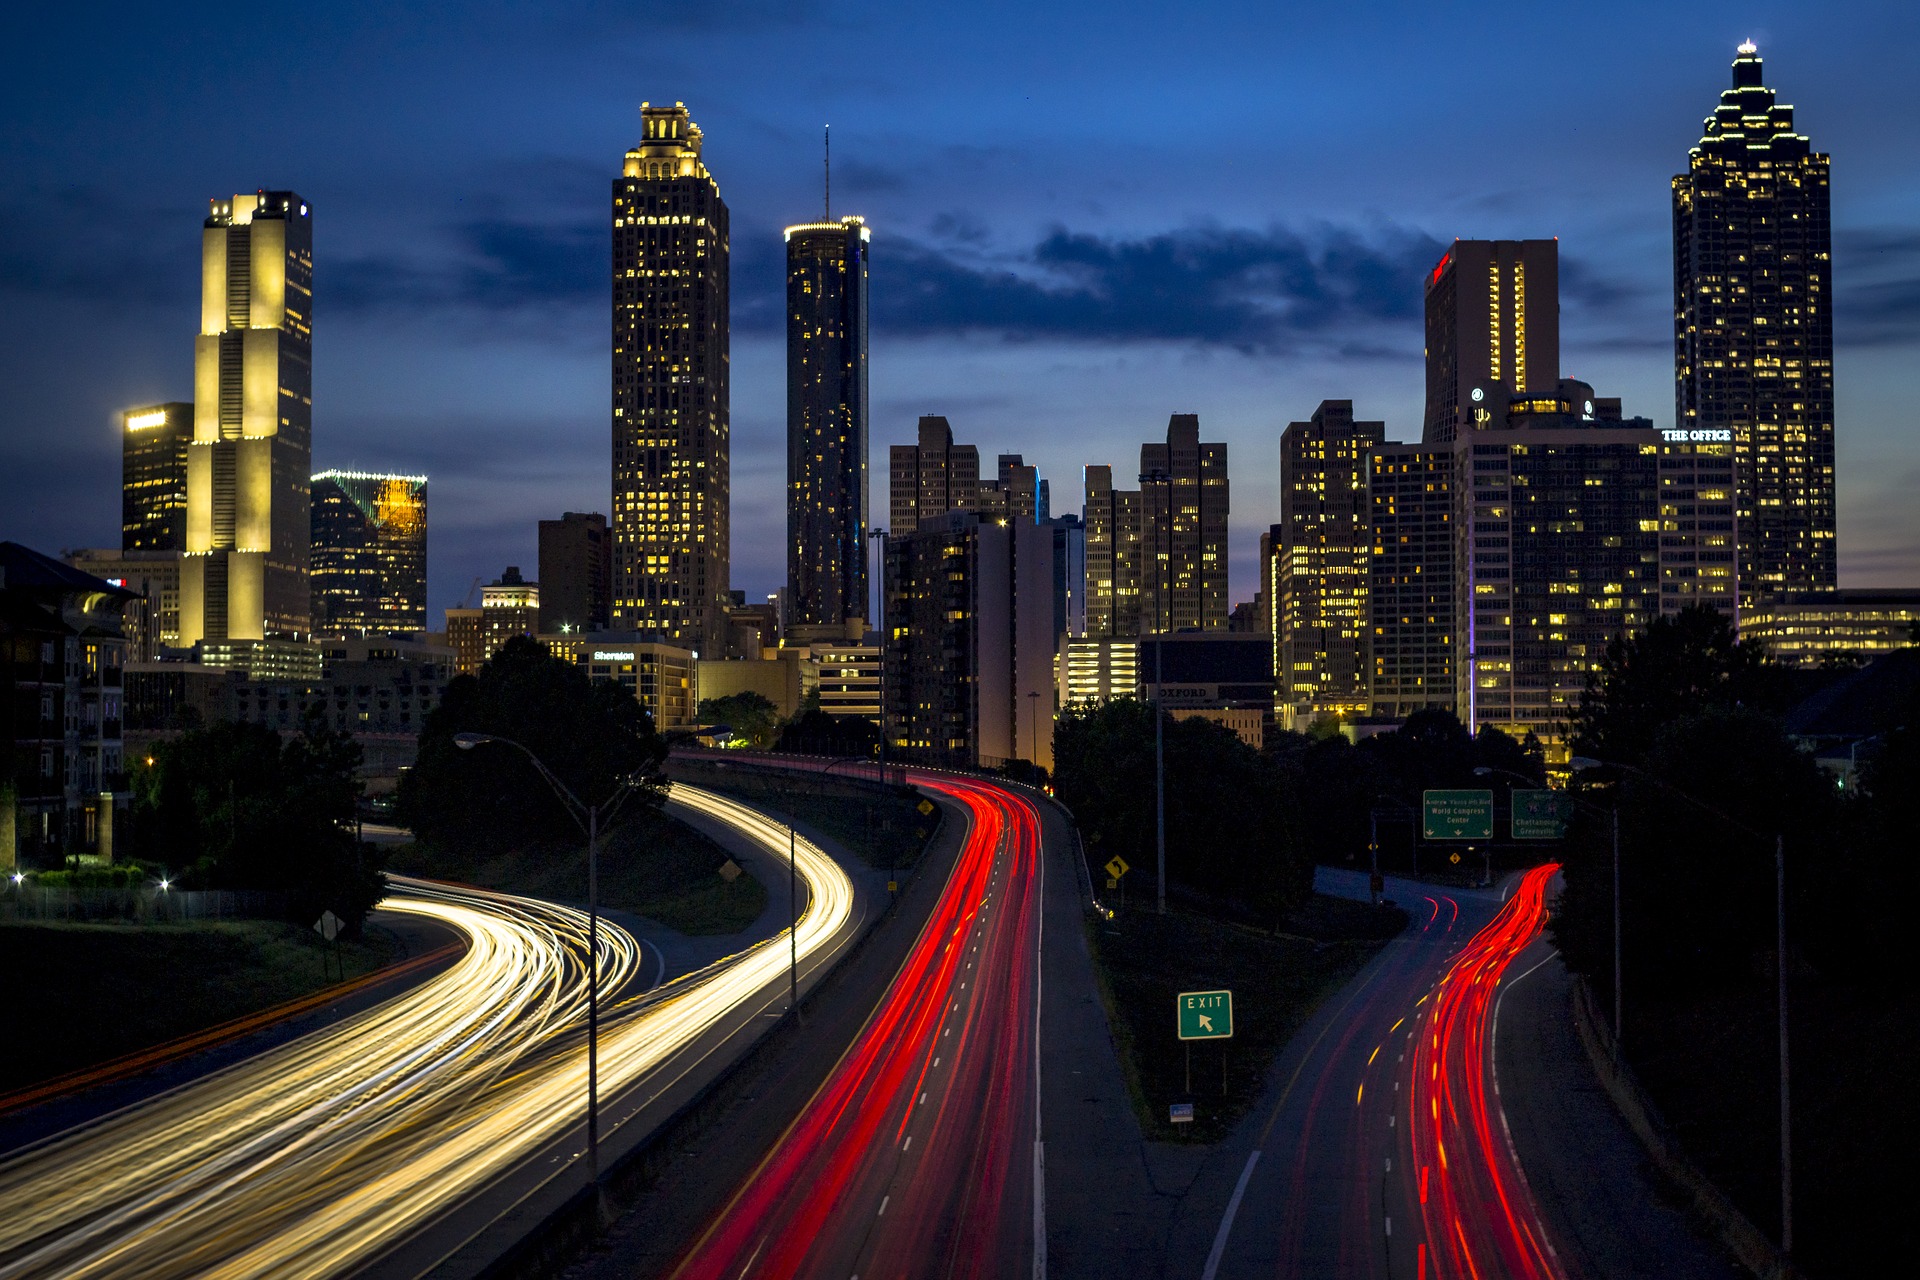 Timelapse photo of a City Interstate and Skyscrapers at Night